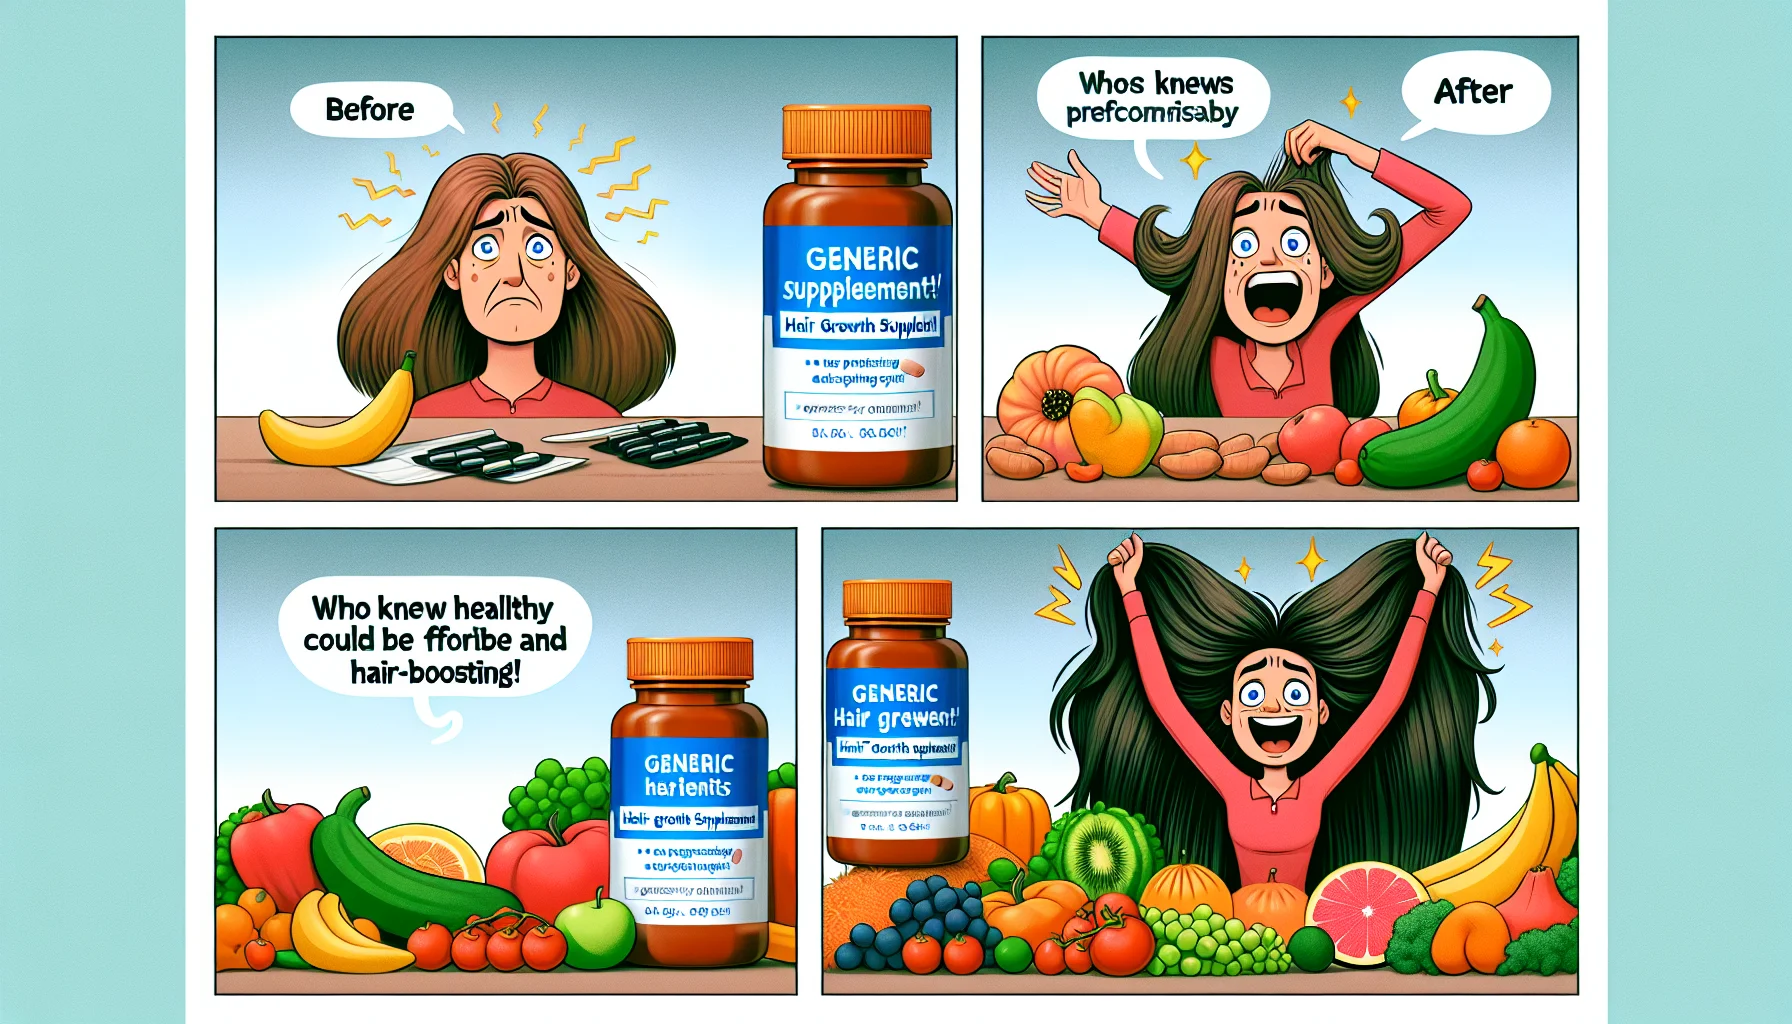 A comically exaggerated scene portraying the benefits of a generic hair growth supplement. There's a before and after skit showing a character with thinning hair looking distressed while being surrounded by expensive foods. This is contrasted with a gleeful character with luscious locks of hair afterwards who's surrounded by affordable, variety of colorful fresh fruits and vegetables, reinforcing the idea that eating healthily doesn't have to be expensive. The product bottle is clearly displayed in both scenes, and a cheeky speech bubble from the second character exclaims 'Who knew healthy could be affordable and hair-boosting!'